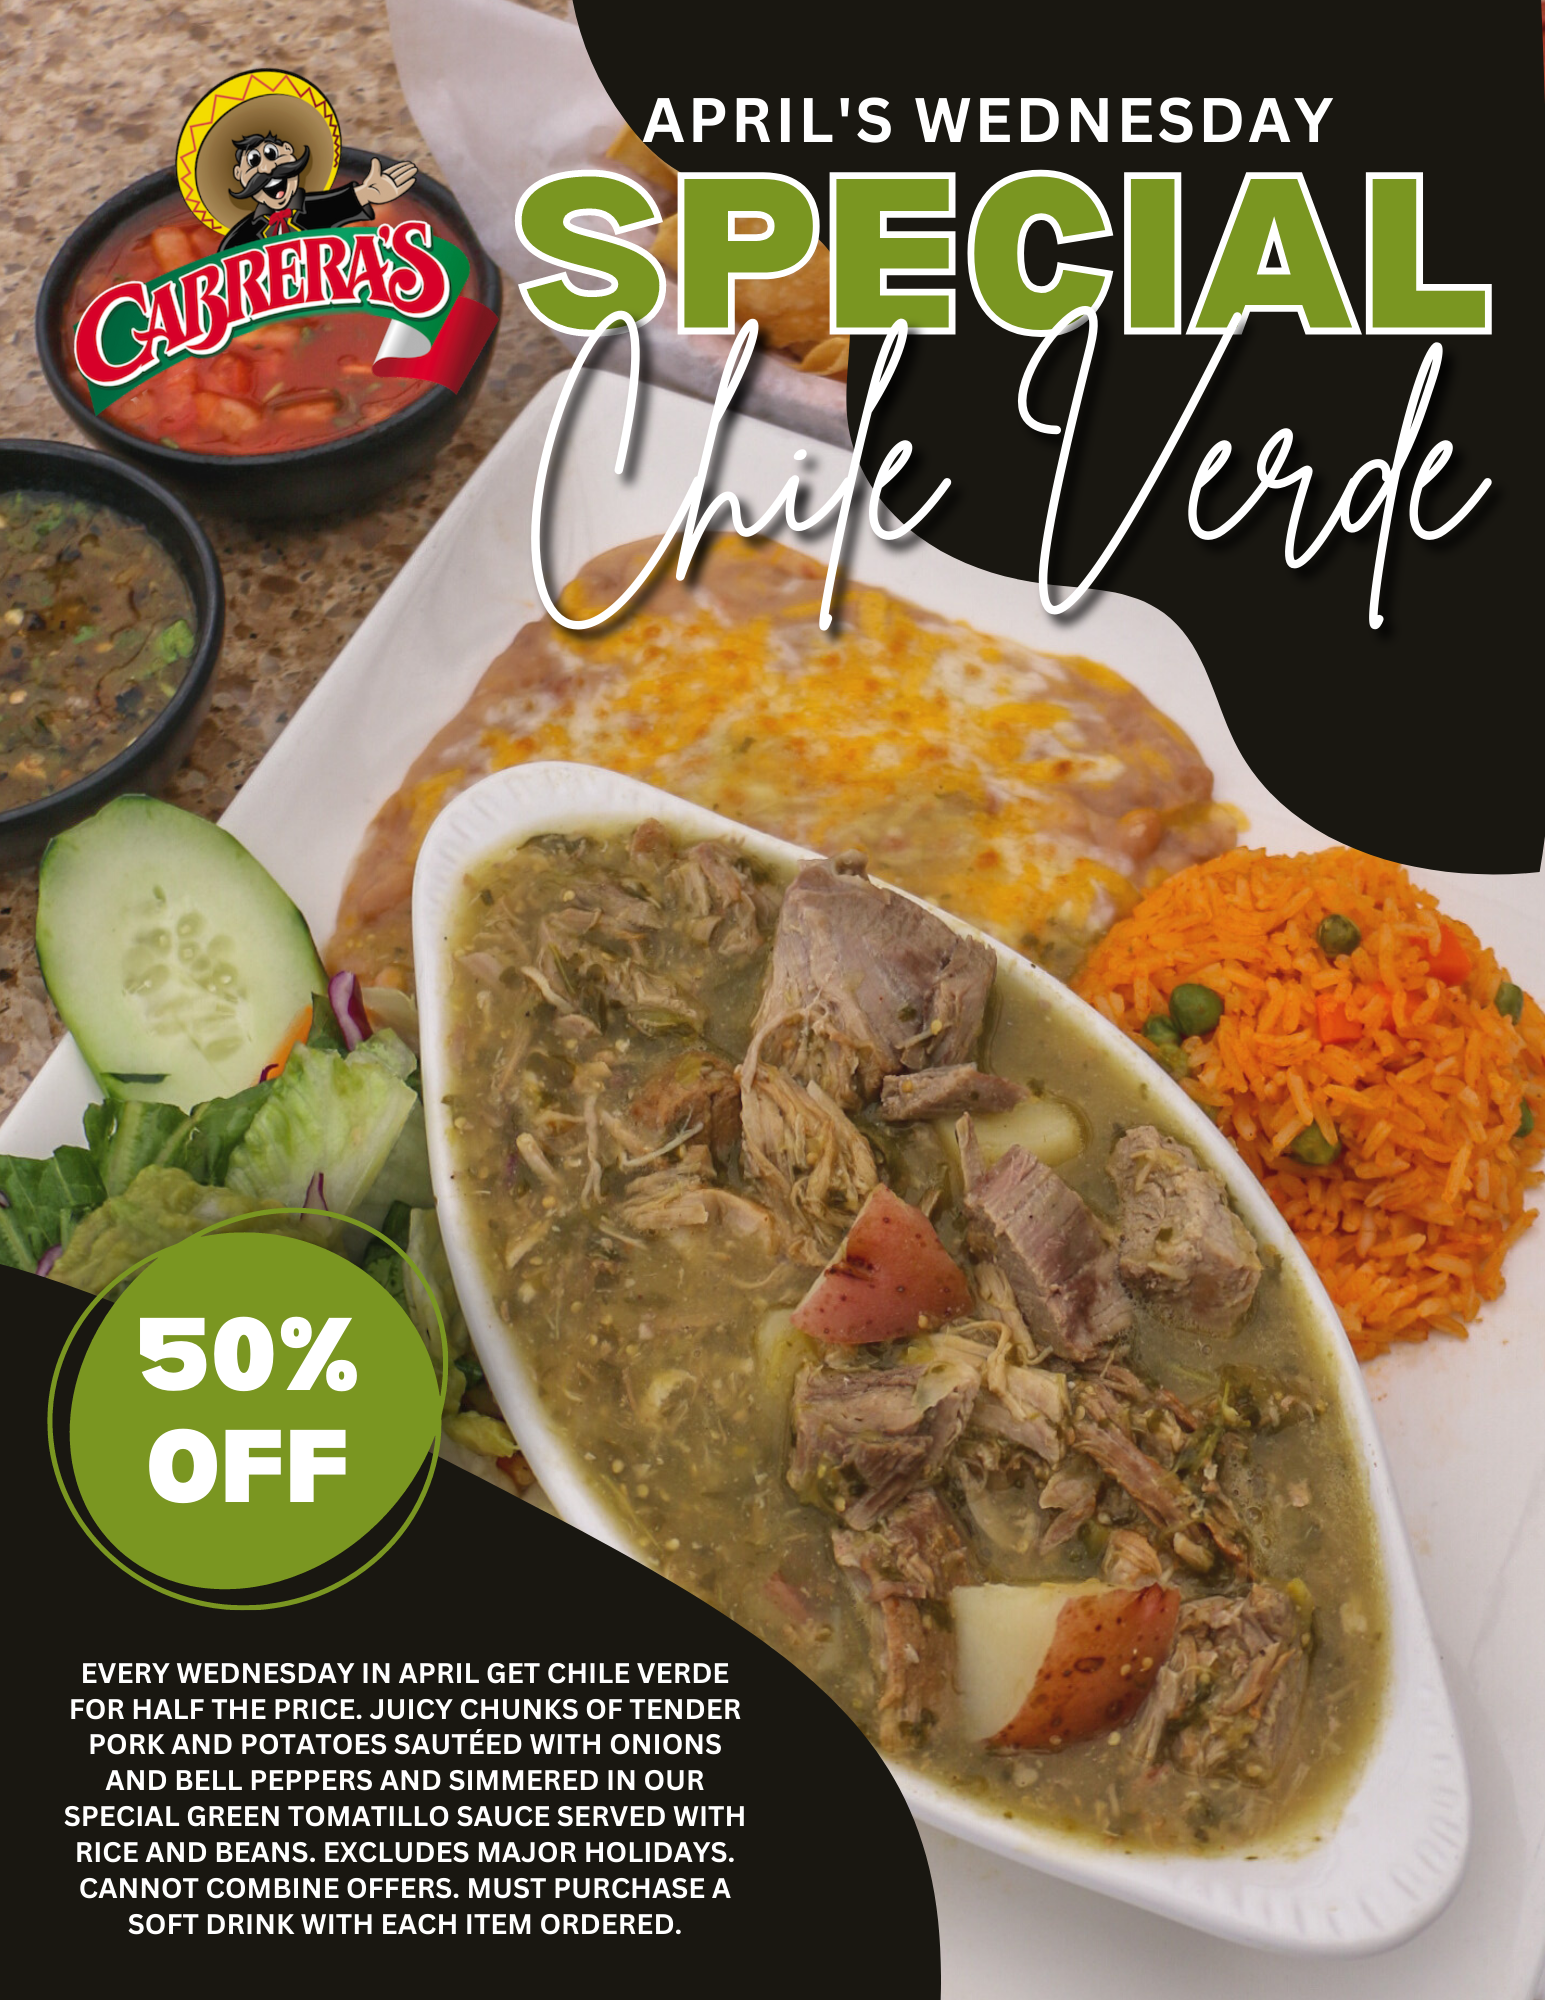 Cabrera's chile verde special for the month of April